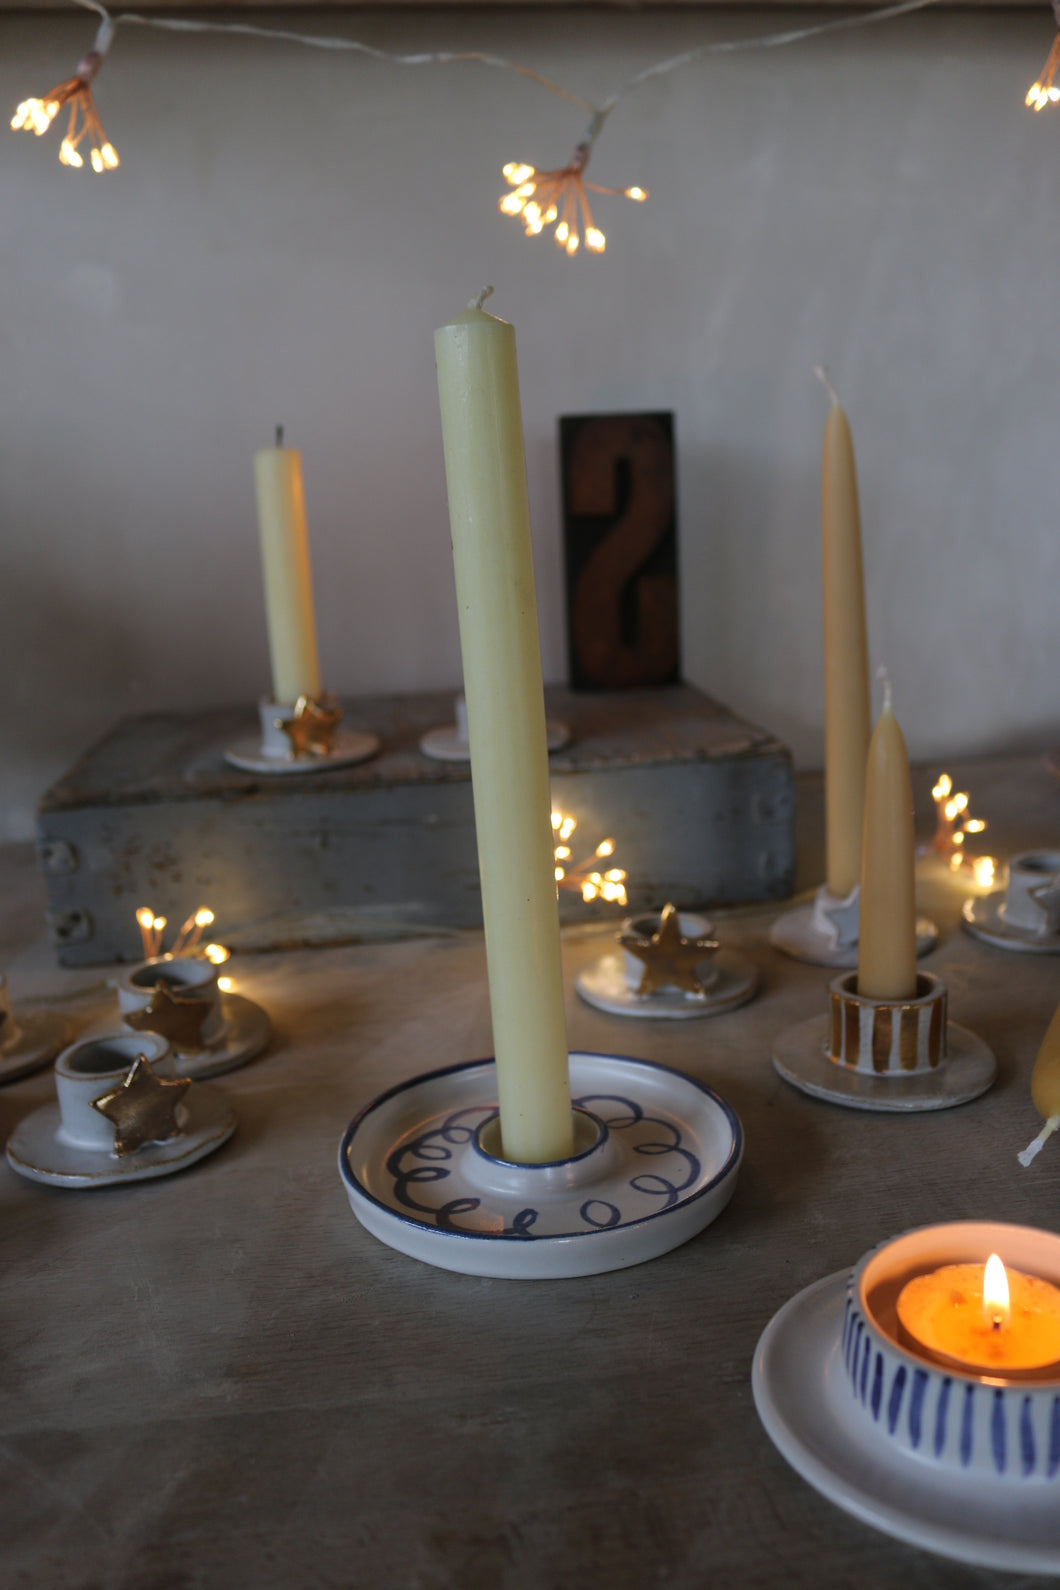 Standard candle holder with curly whirlers